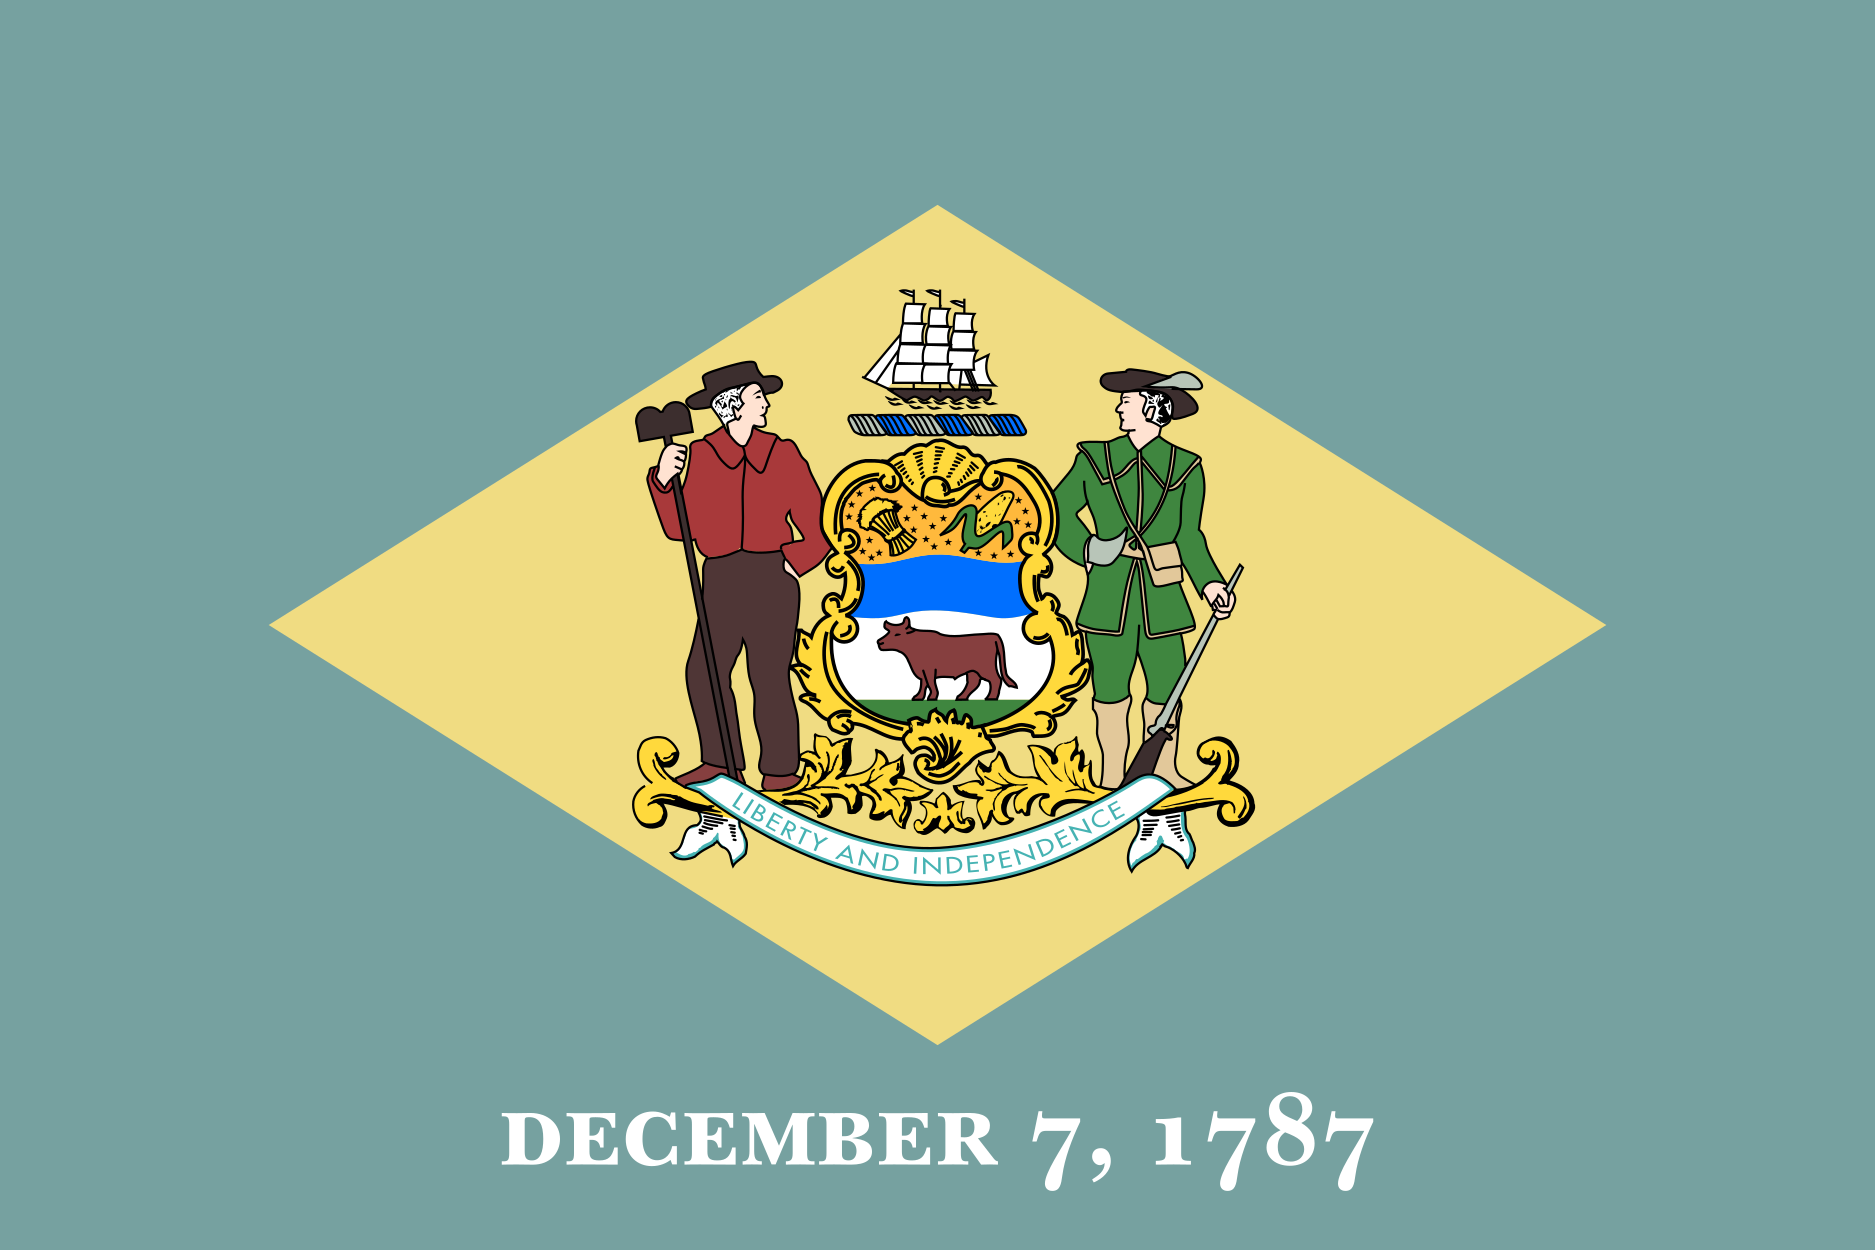 Free Delaware Flag Images: AI, EPS, GIF, JPG, PDF, PNG, SVG and more!